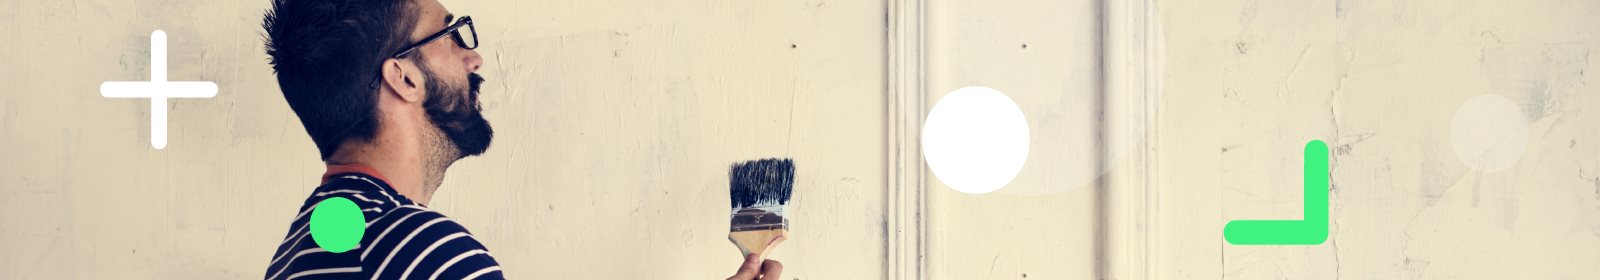 Sellers guide: Getting your home ready to sell 